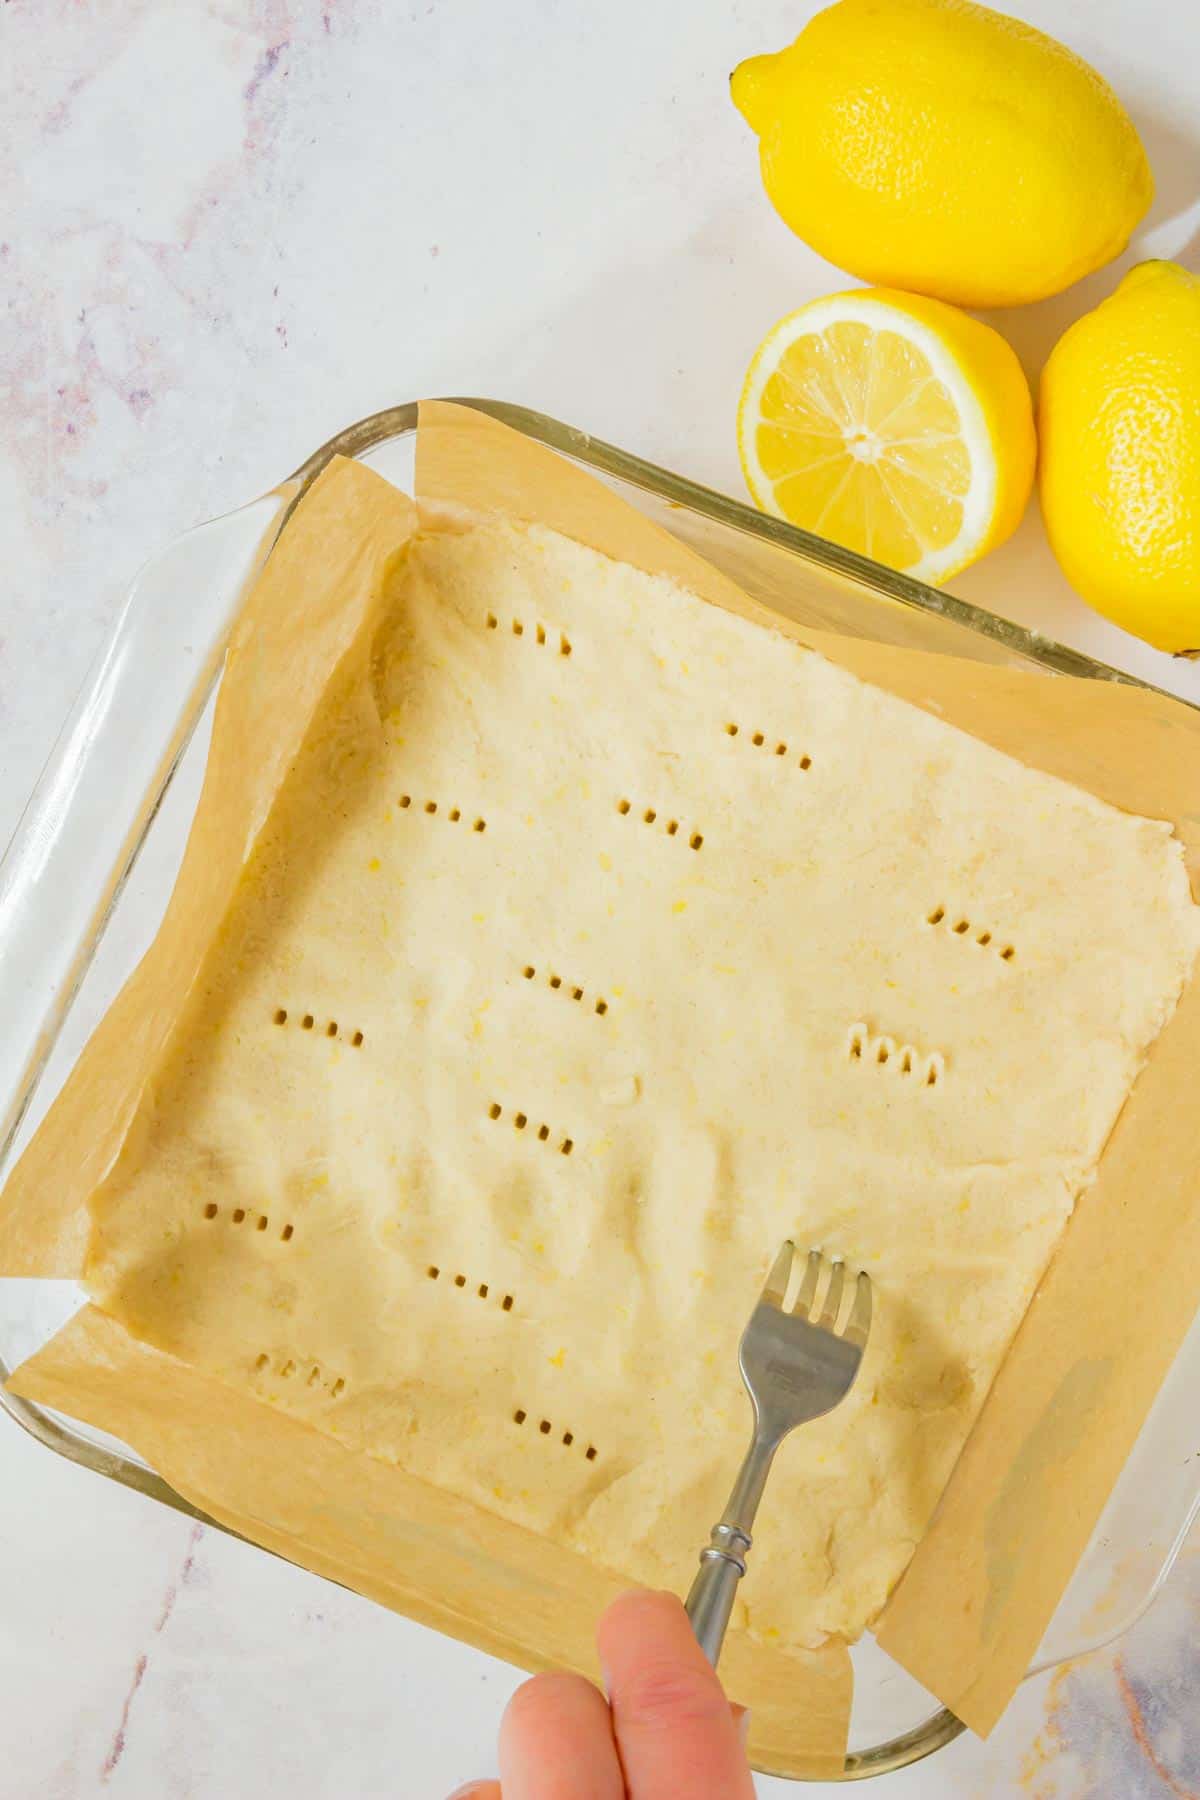 A fork is used to prick holes in the crust dough in a parchment-lined baking dish.